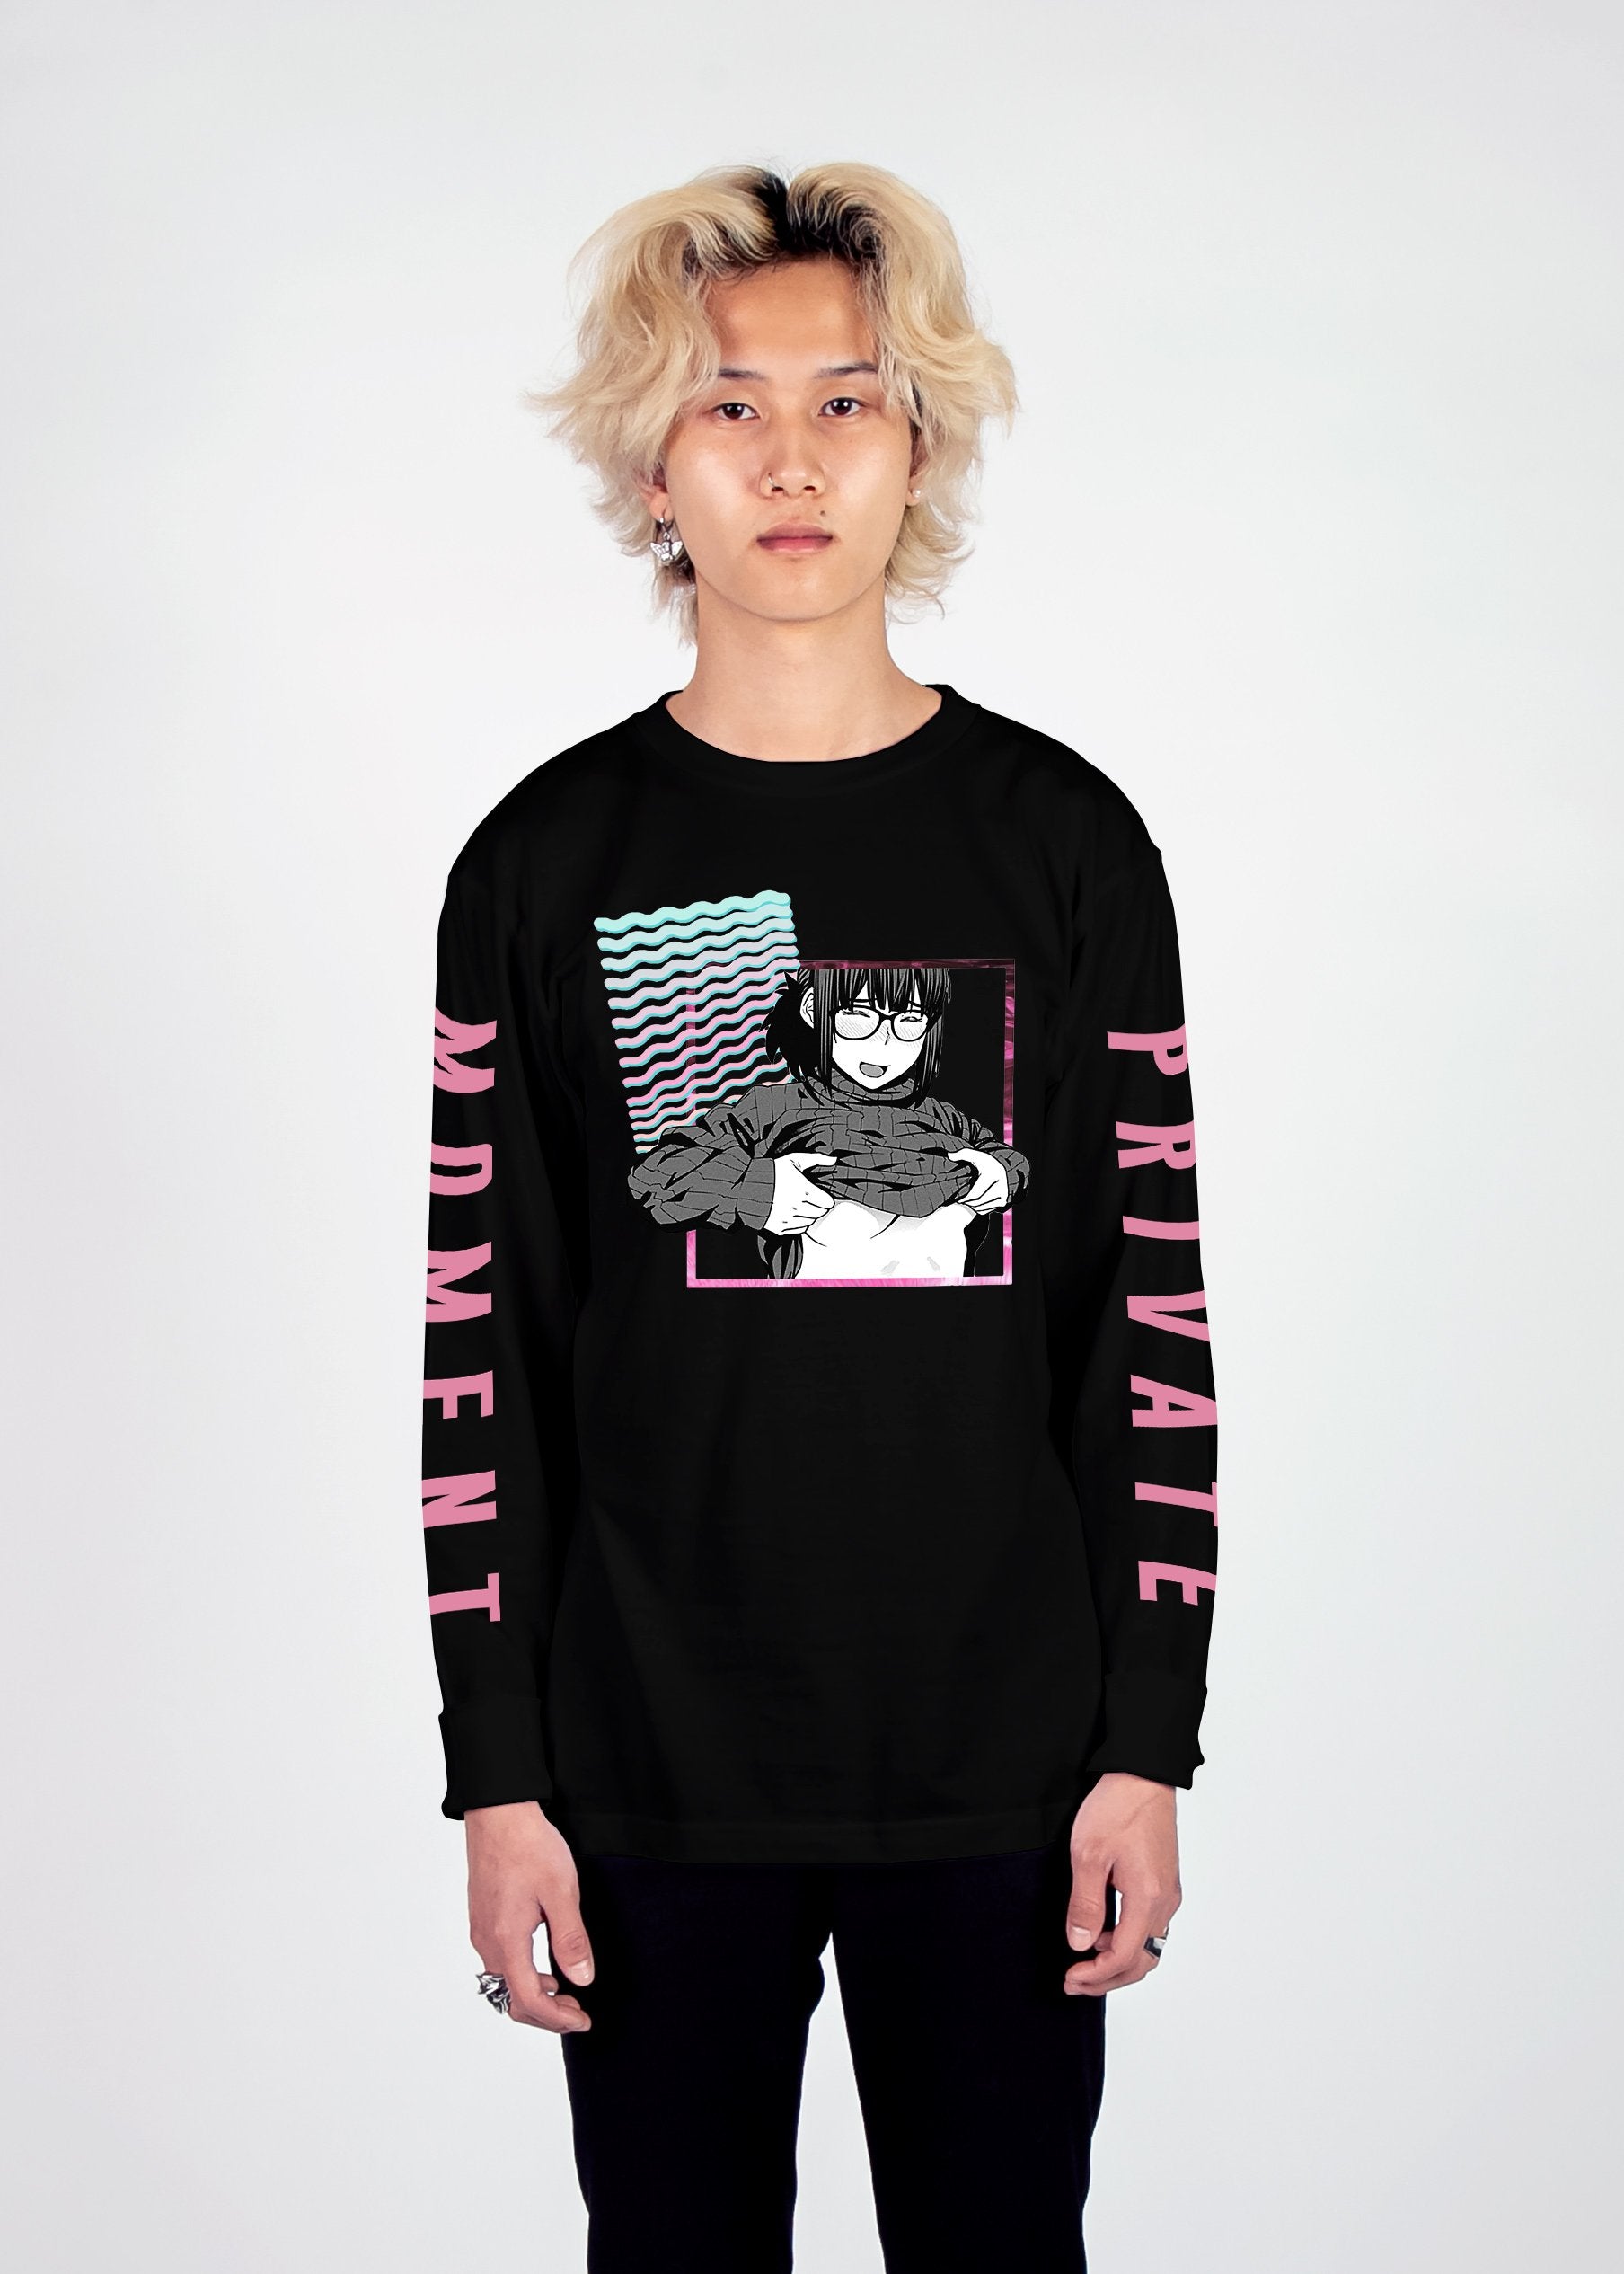 Private Moment Long Sleeve Tee Long Sleeve Graphic Tee Vapor95